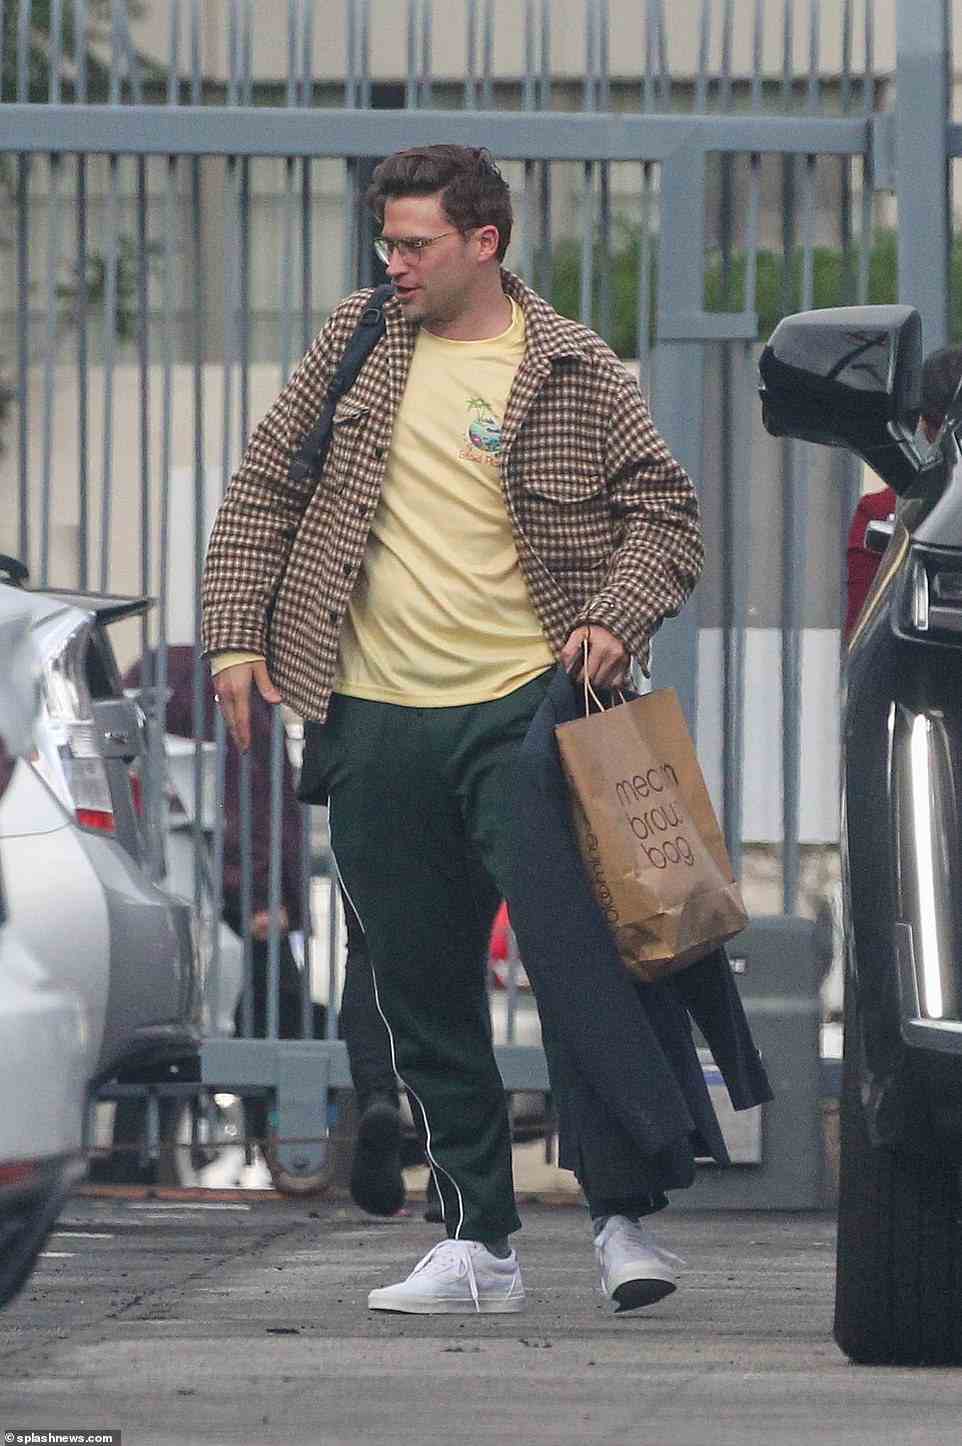 Juggling a lot: Tom Schwartz sported a yellow t-shirt, checkered brown and beige coat and sweatpants